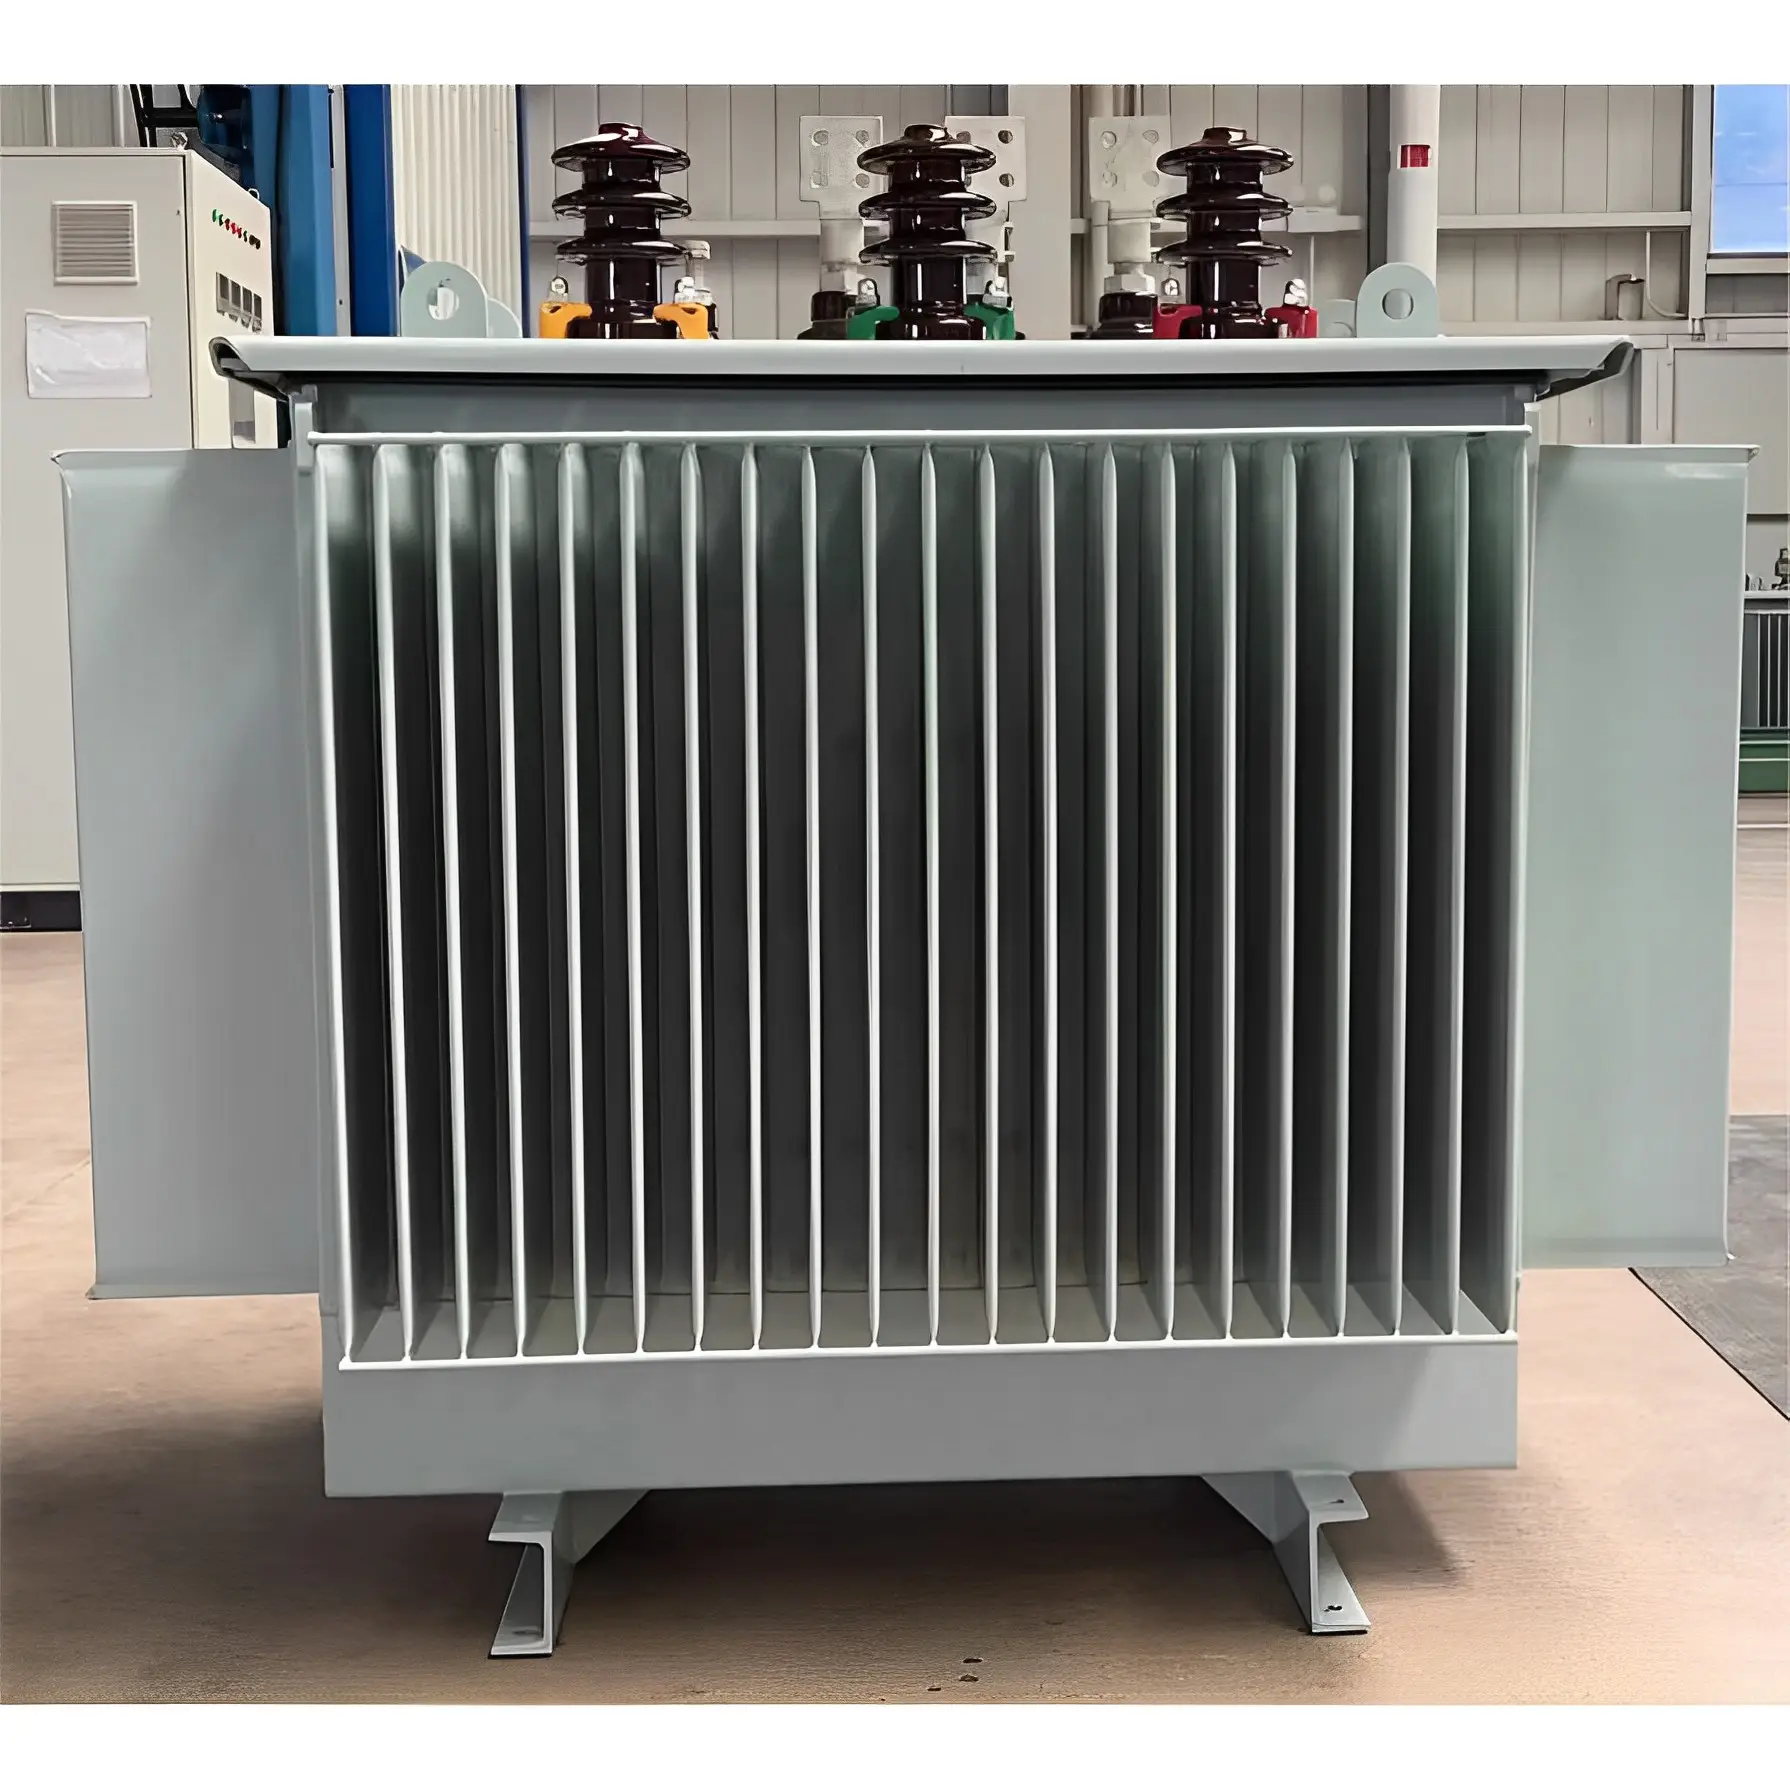 Electric Electricity Distribution Transformer 100kva Three Phase Transformer S11 Oil-immersed Toroidal Power Transformer